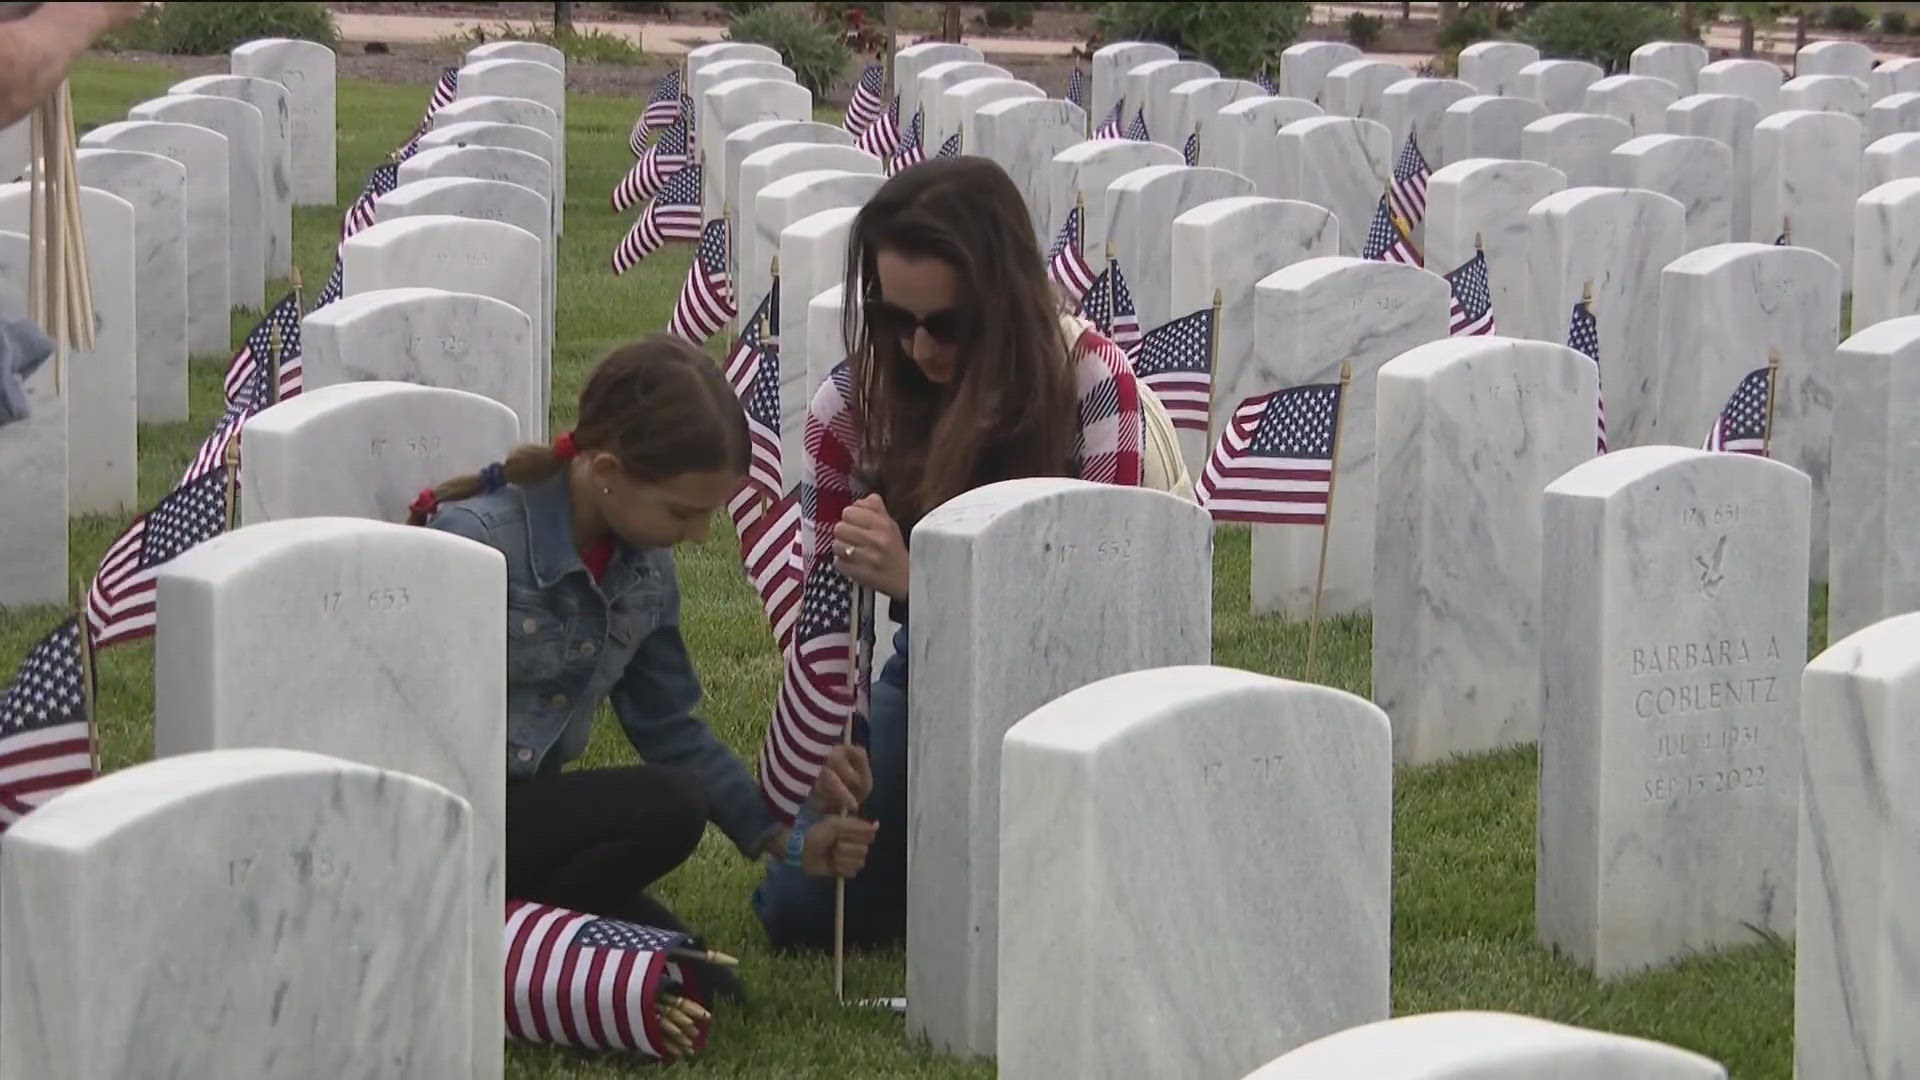 This is the first time since the cemetery opened in 2010 that flags were placed on every single veteran's gravesite for the Memorial Day holiday.